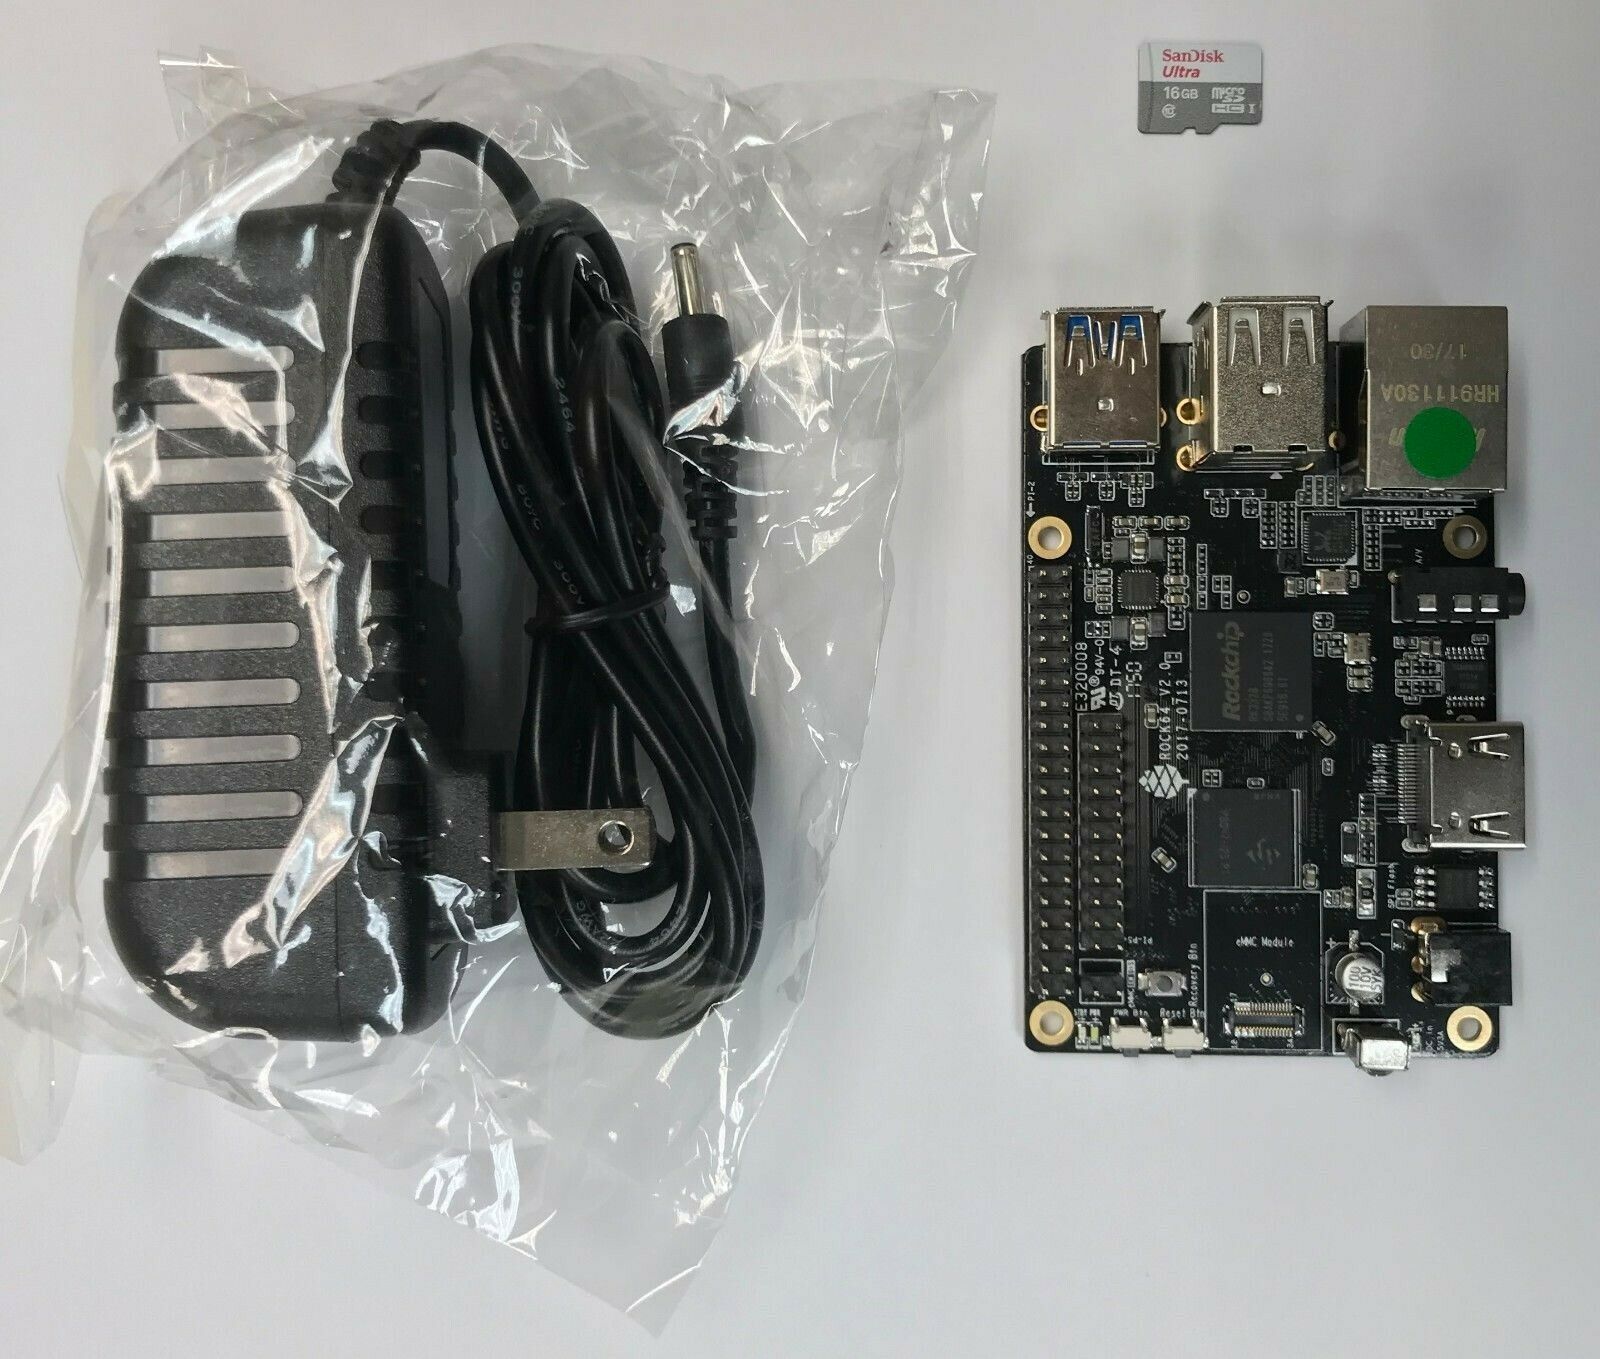 ROCK64 1GB Single Board Computer Kit V2 includes MicroSD and Power Adapter